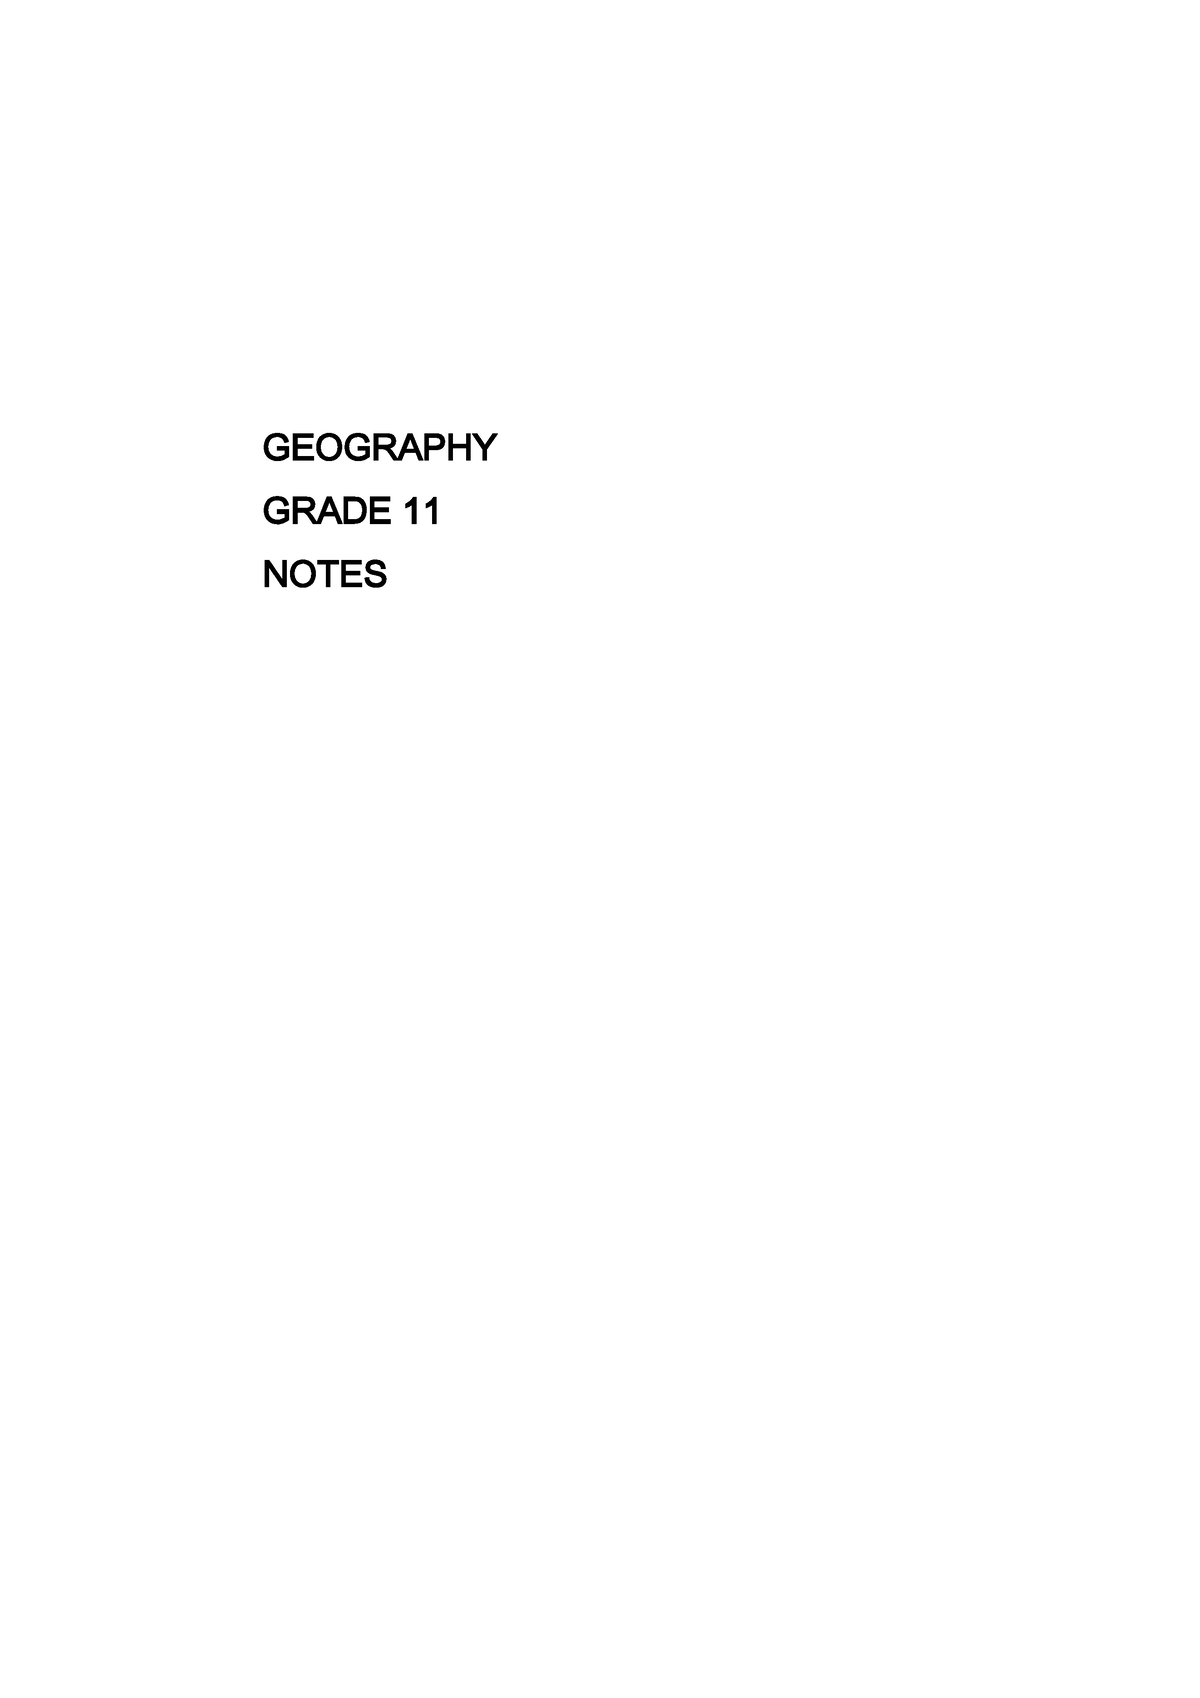 grade-11-geography-notes-geography-grade-1-1-notes-using-resources-to